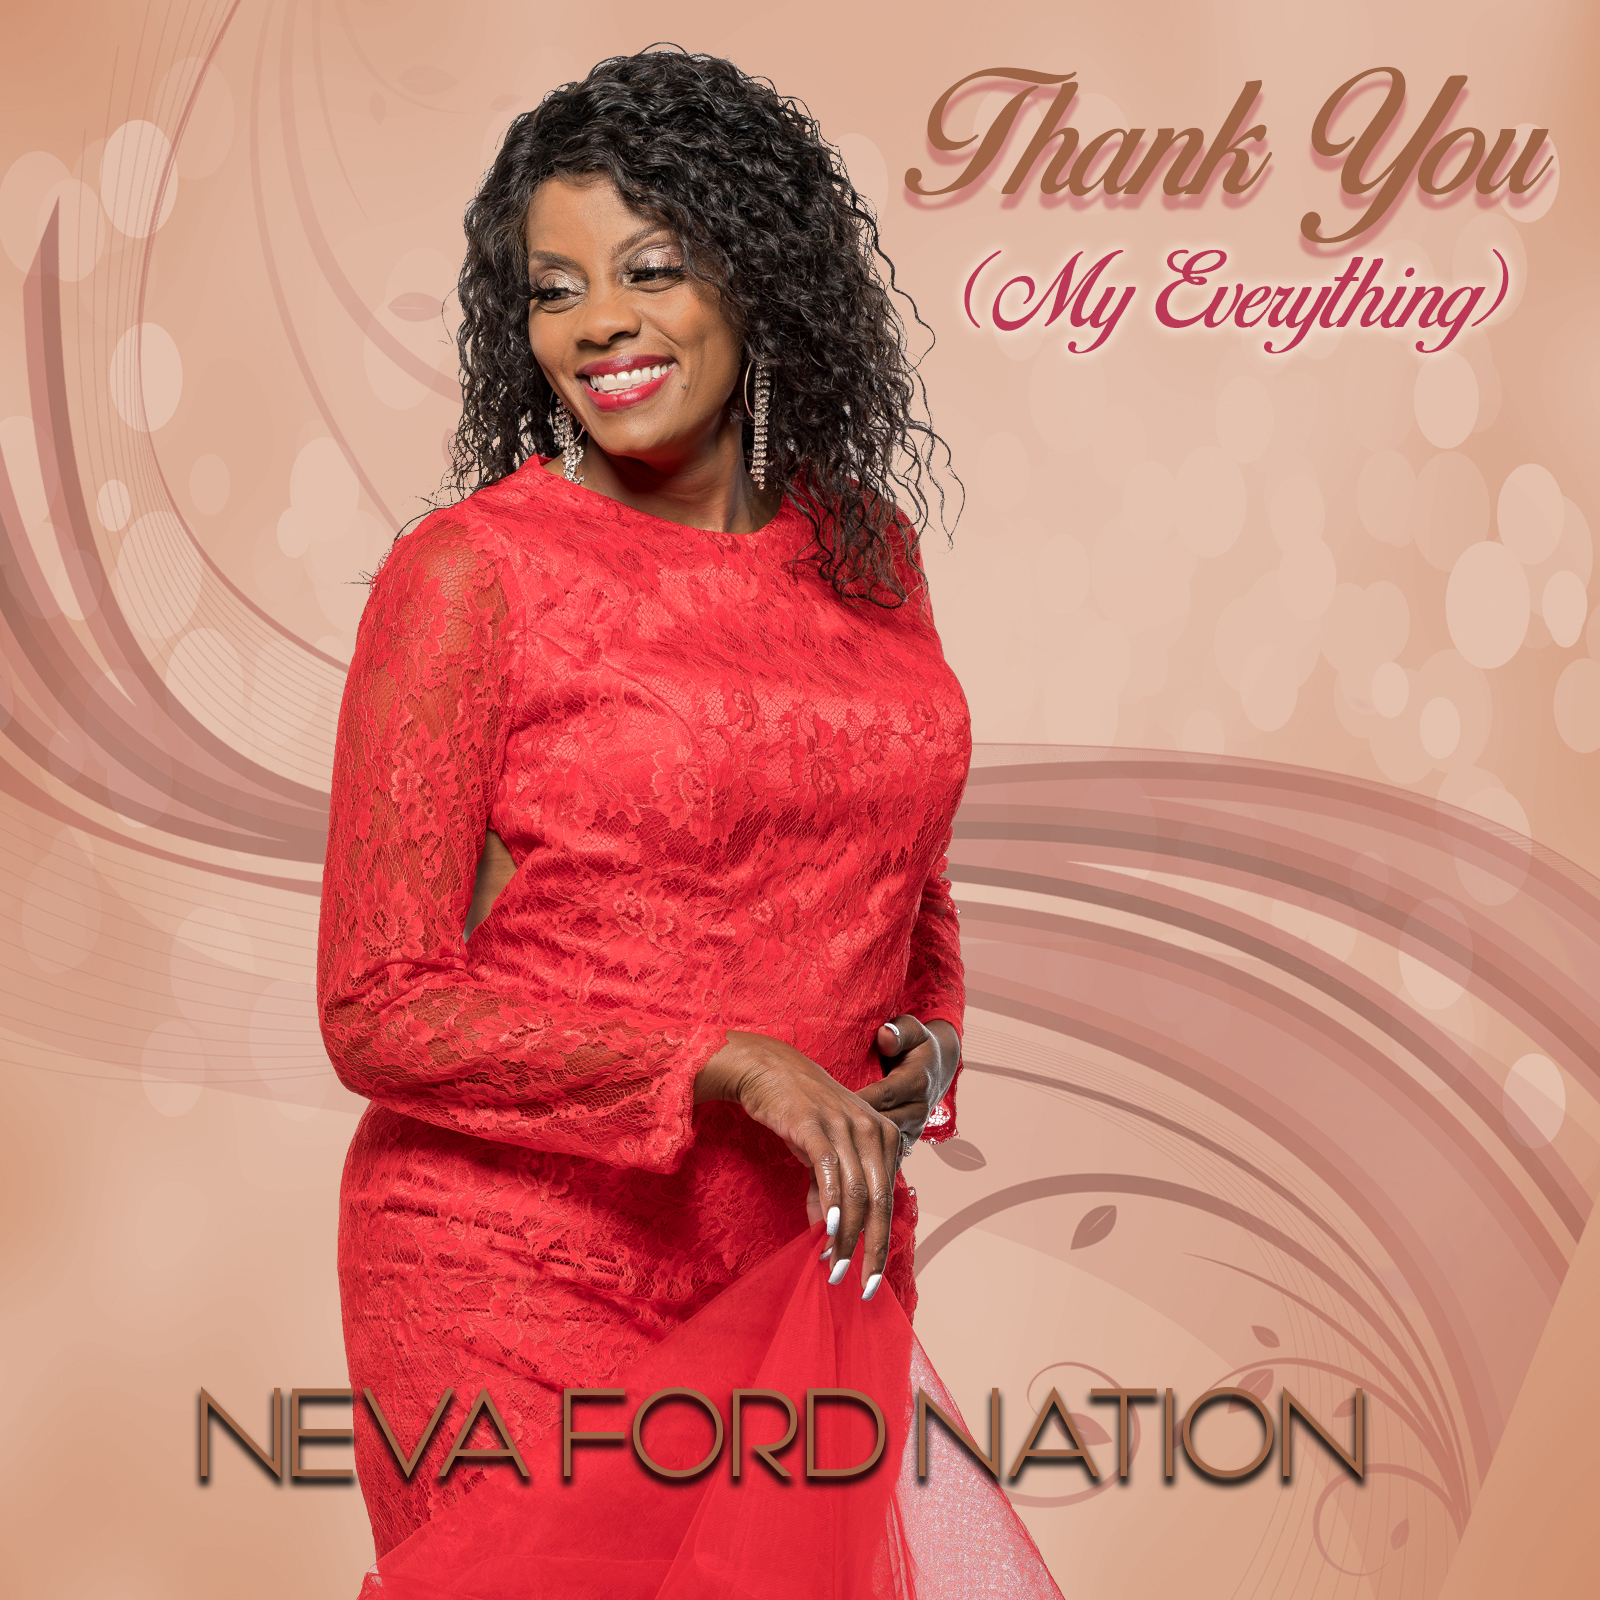 Art for Thank You ( My Everything) by NEVA FORD NATION